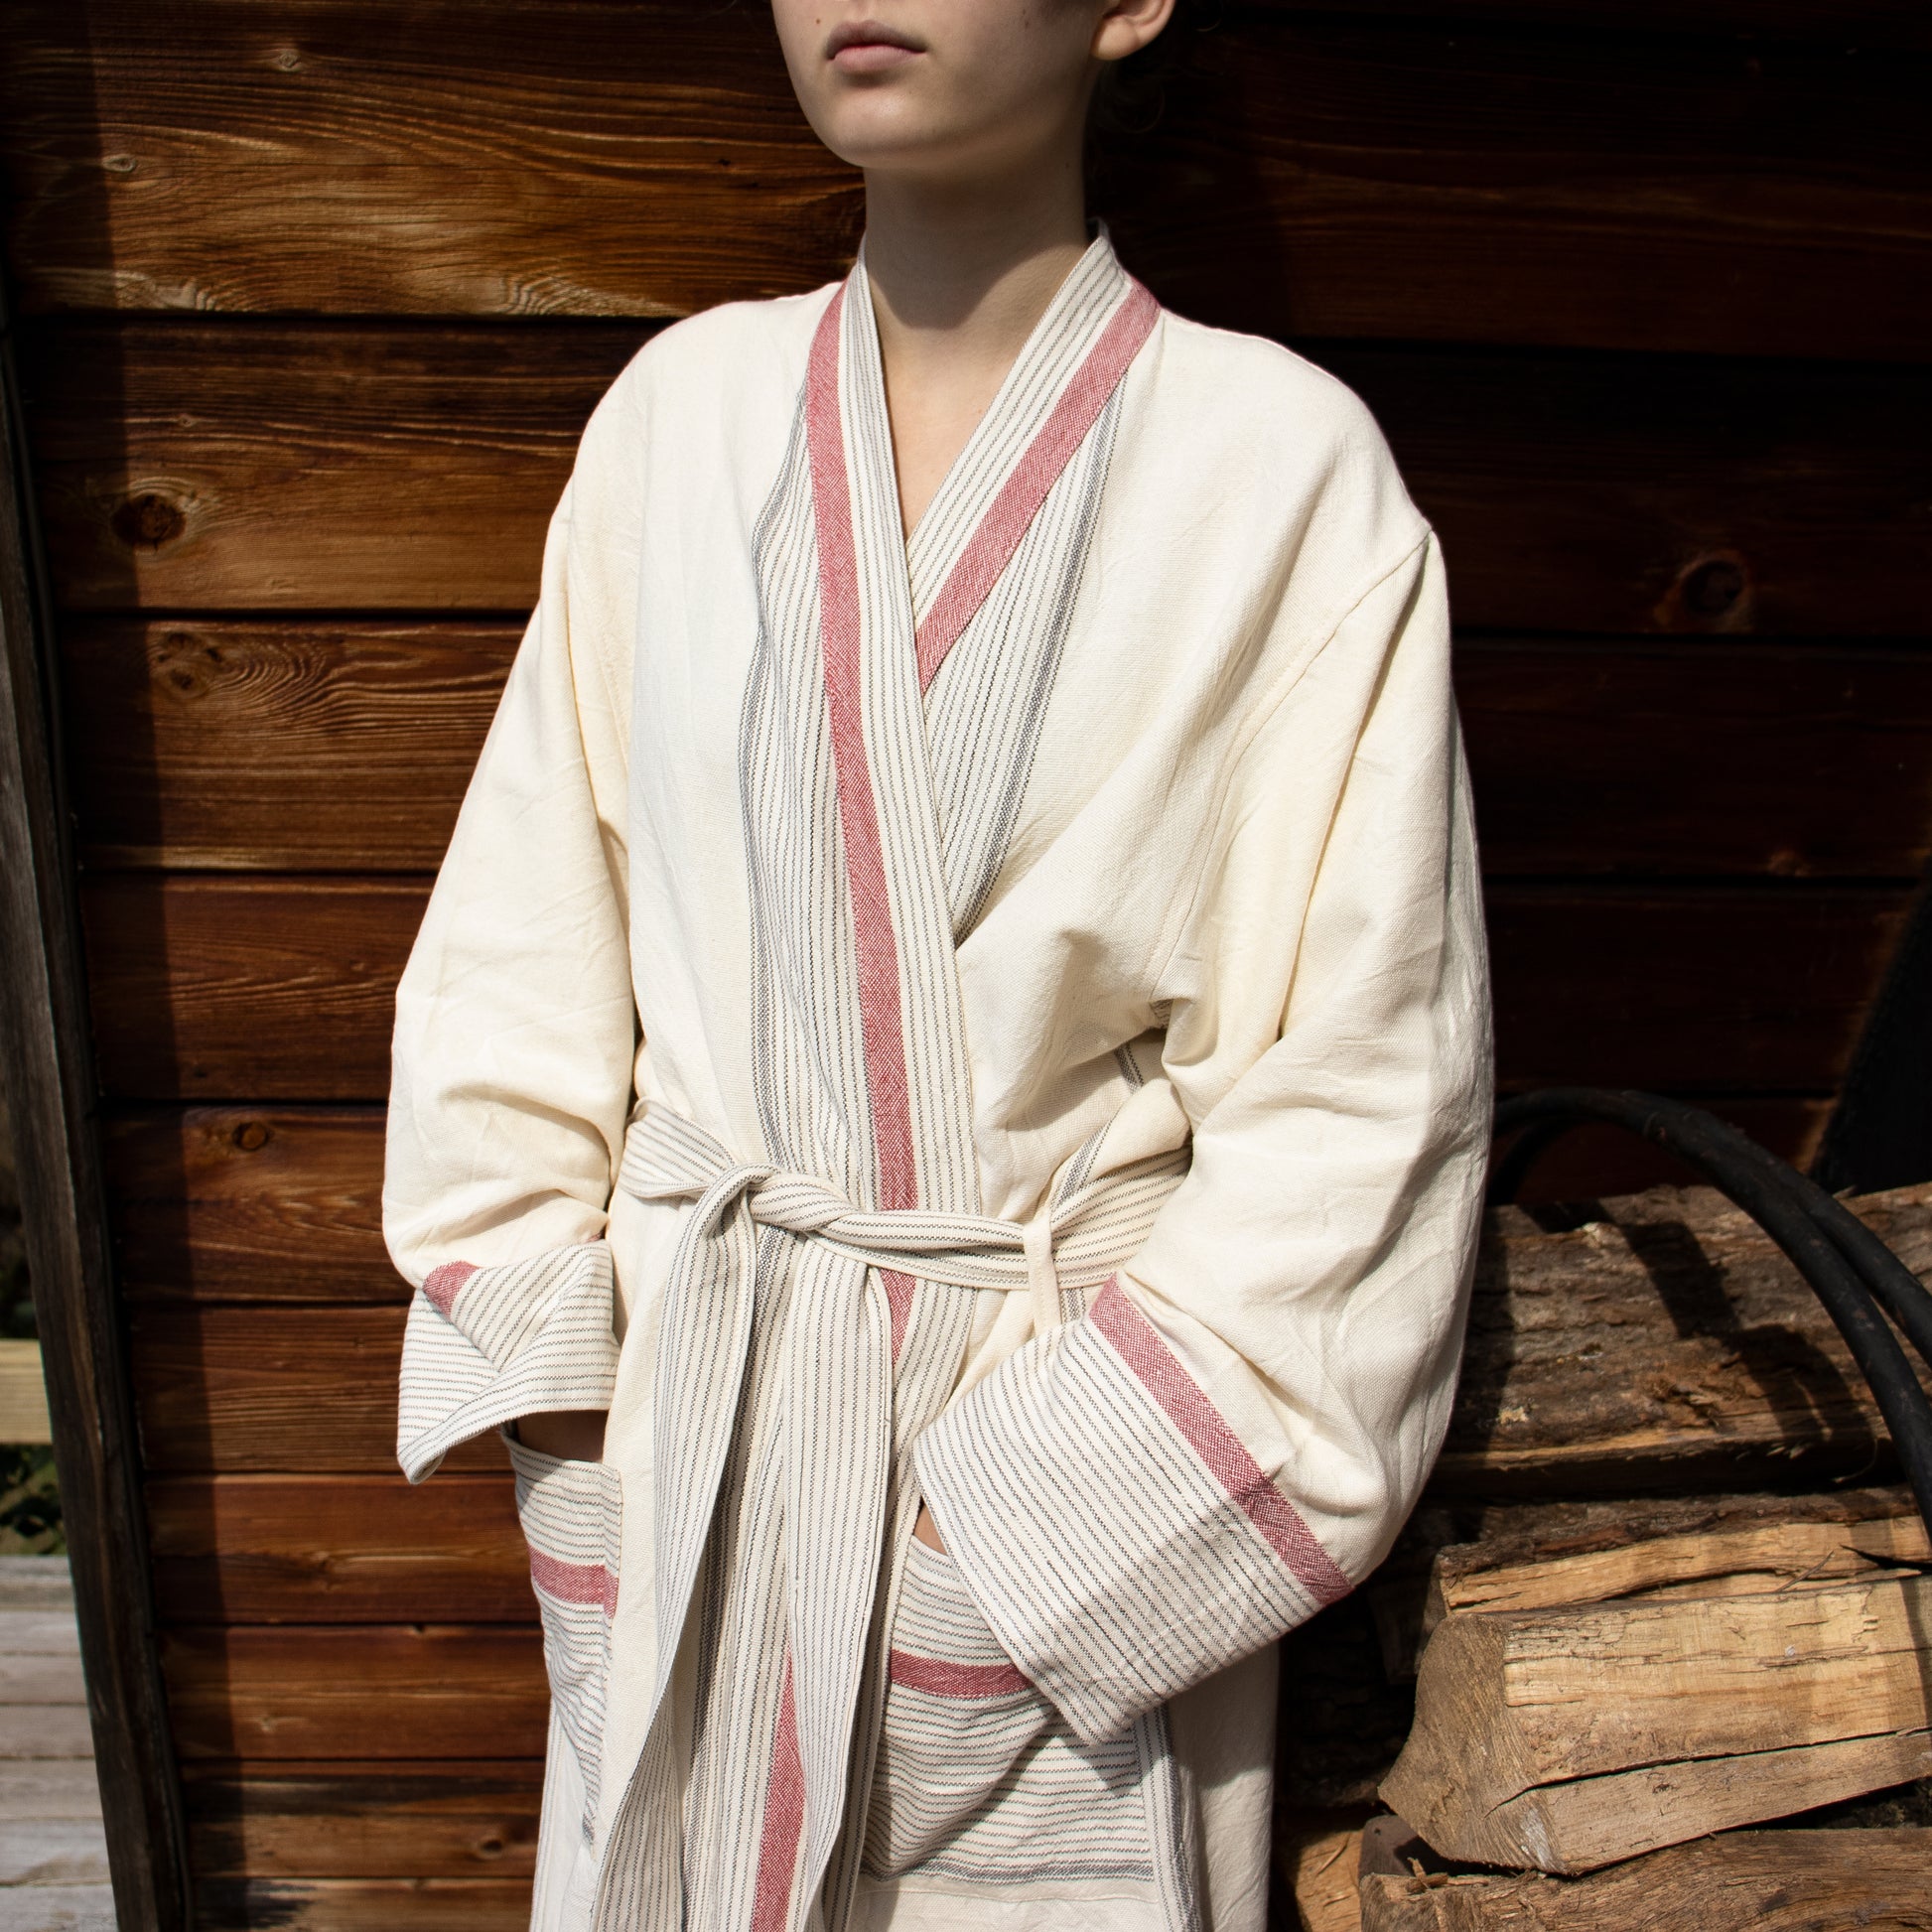 100% premium Turkish cotton long robes hand-loomed and woven by Mediterranean women artisans using traditional techniques for women owned and run Home & Loft of New York.